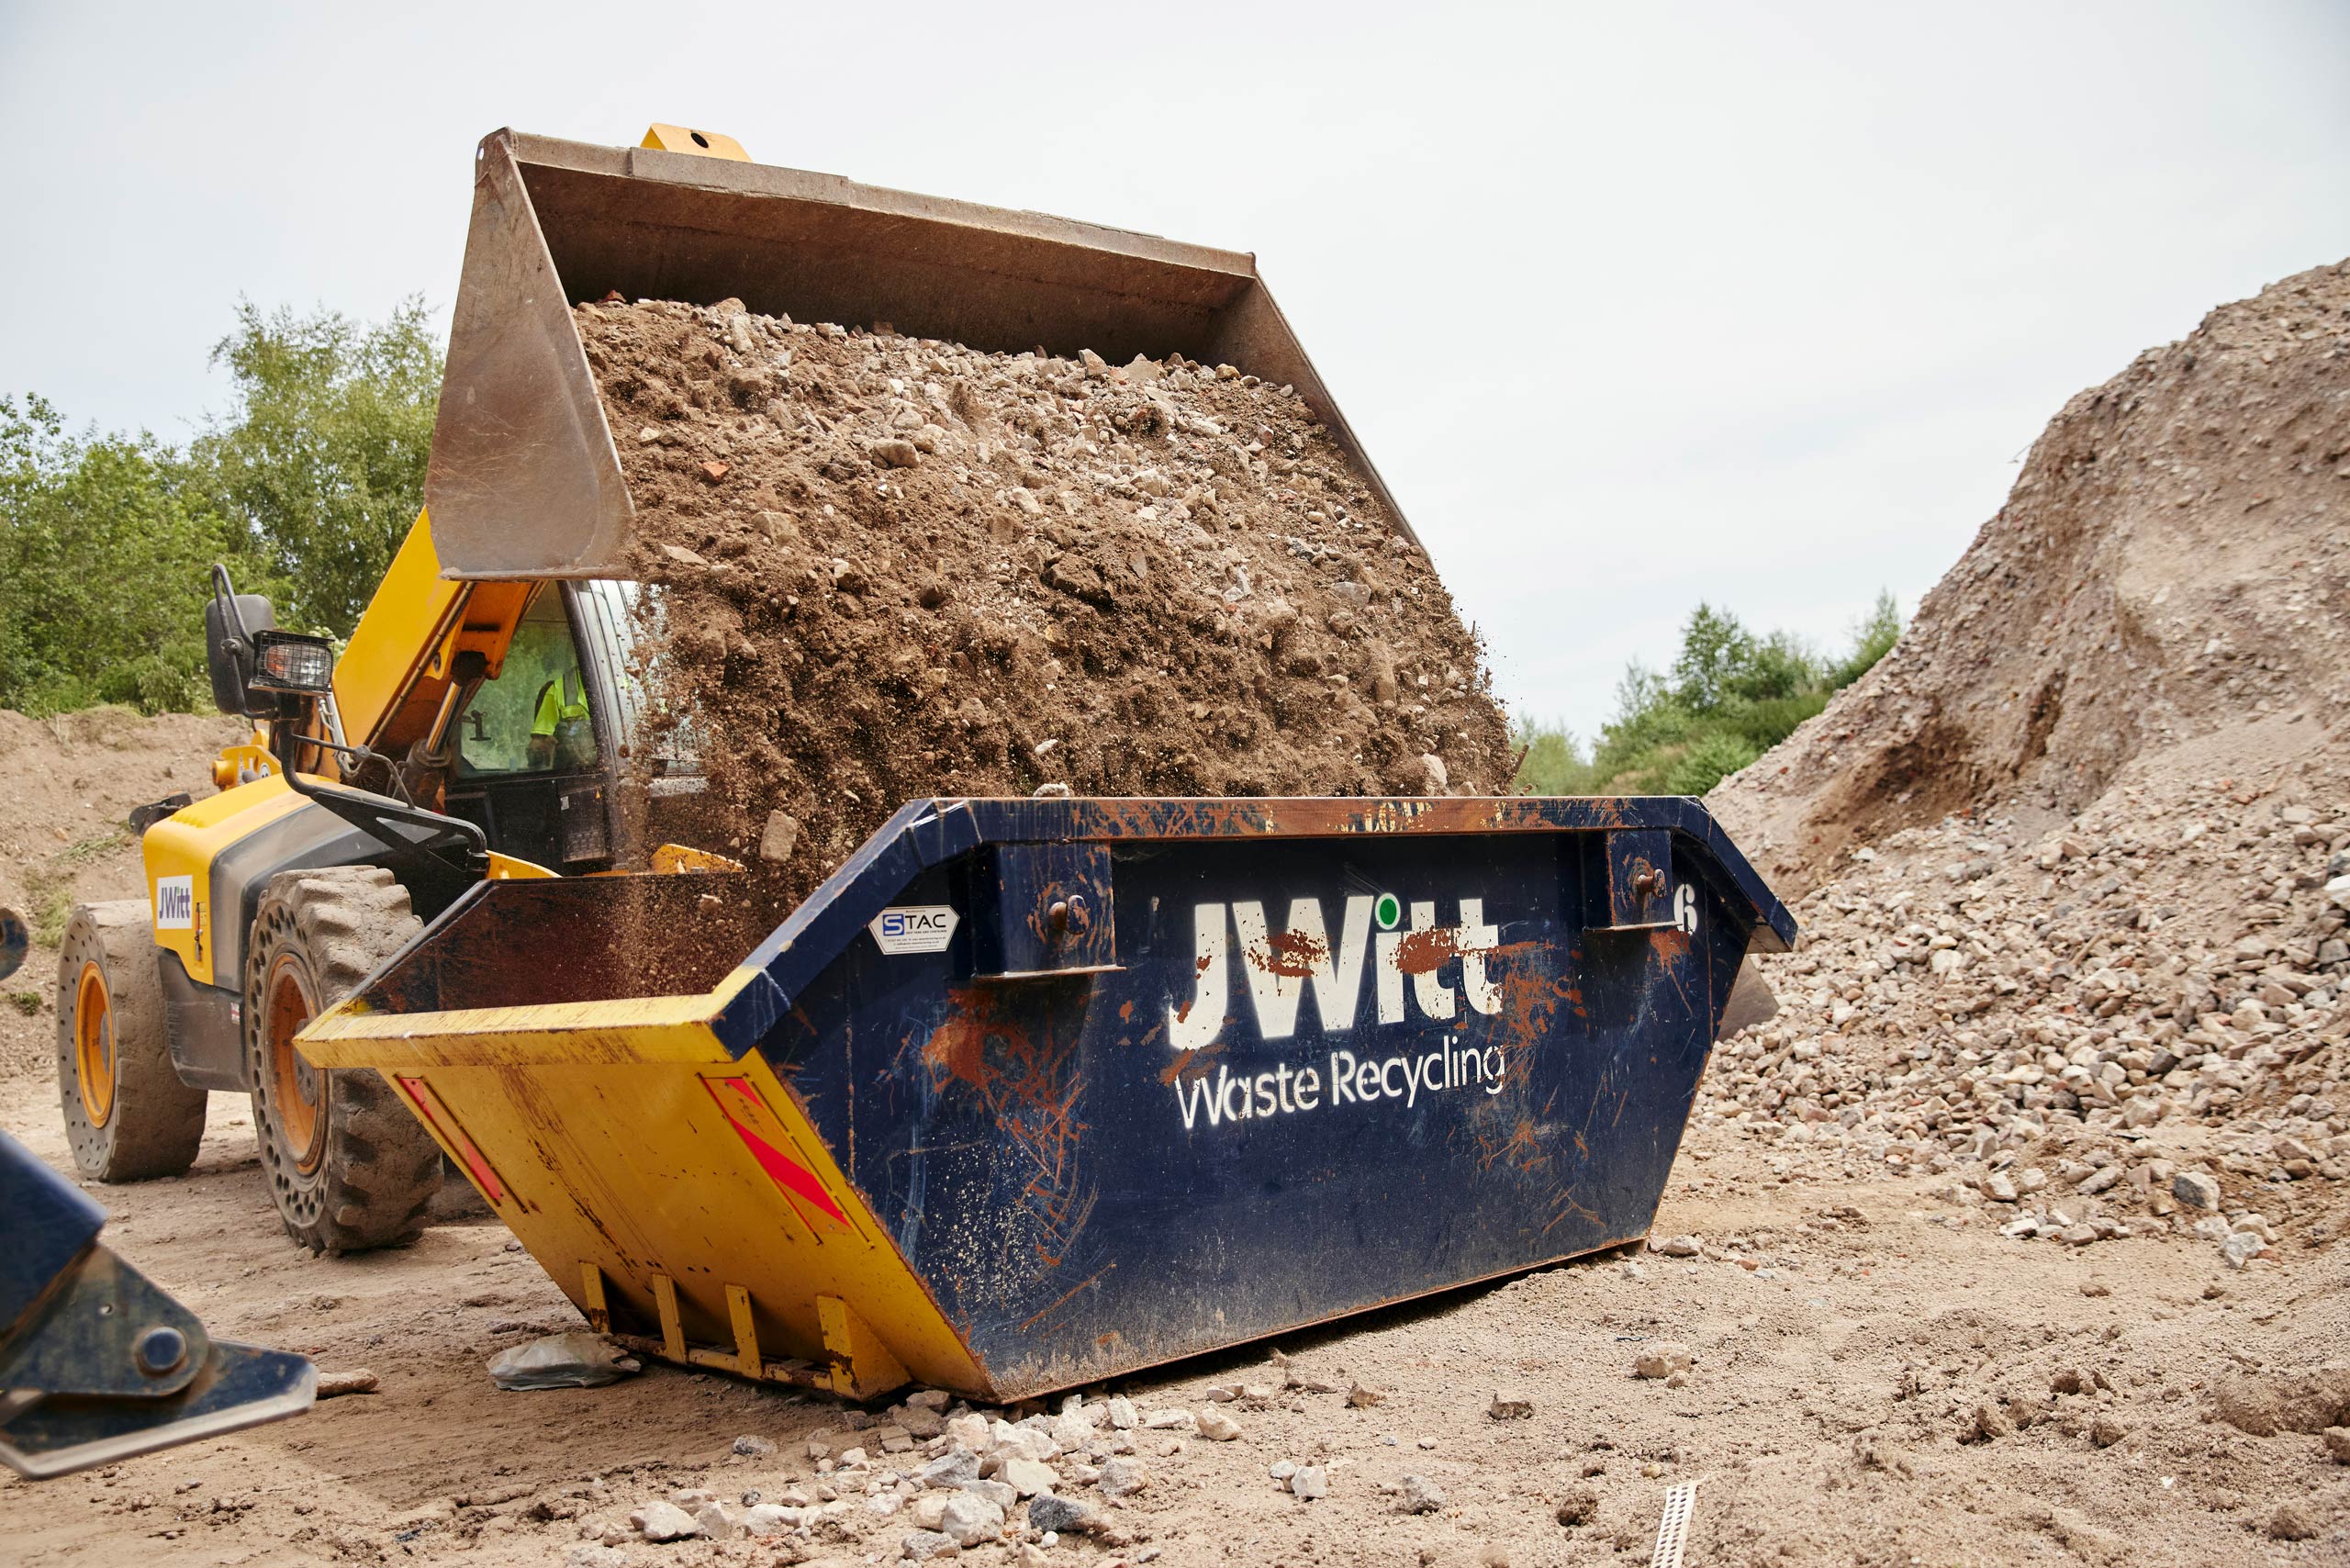 75mm to dust on skip | skip hire and recycles aggregates by JWitt Waste Recycling